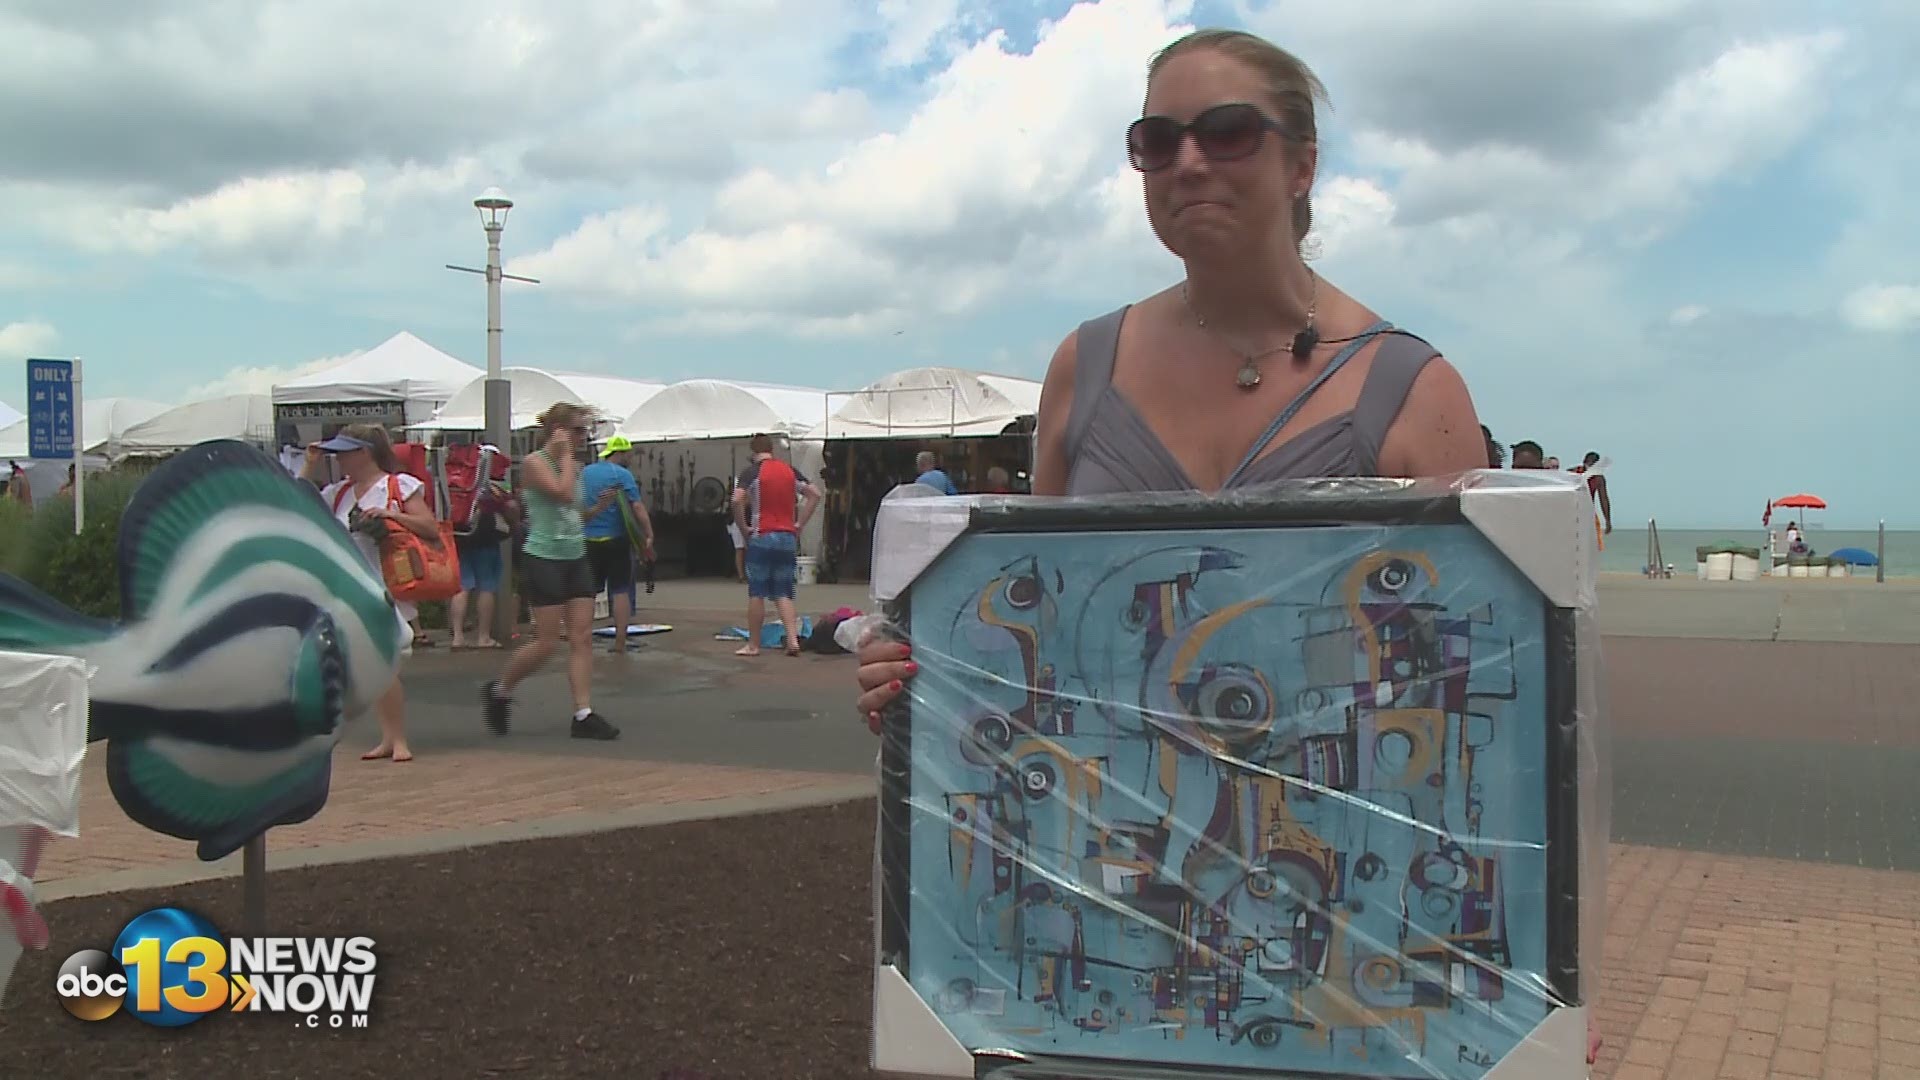 The Virginia Museum of Contemporary Art hosted its annual boardwalk art show this weekend at the Oceanfront.